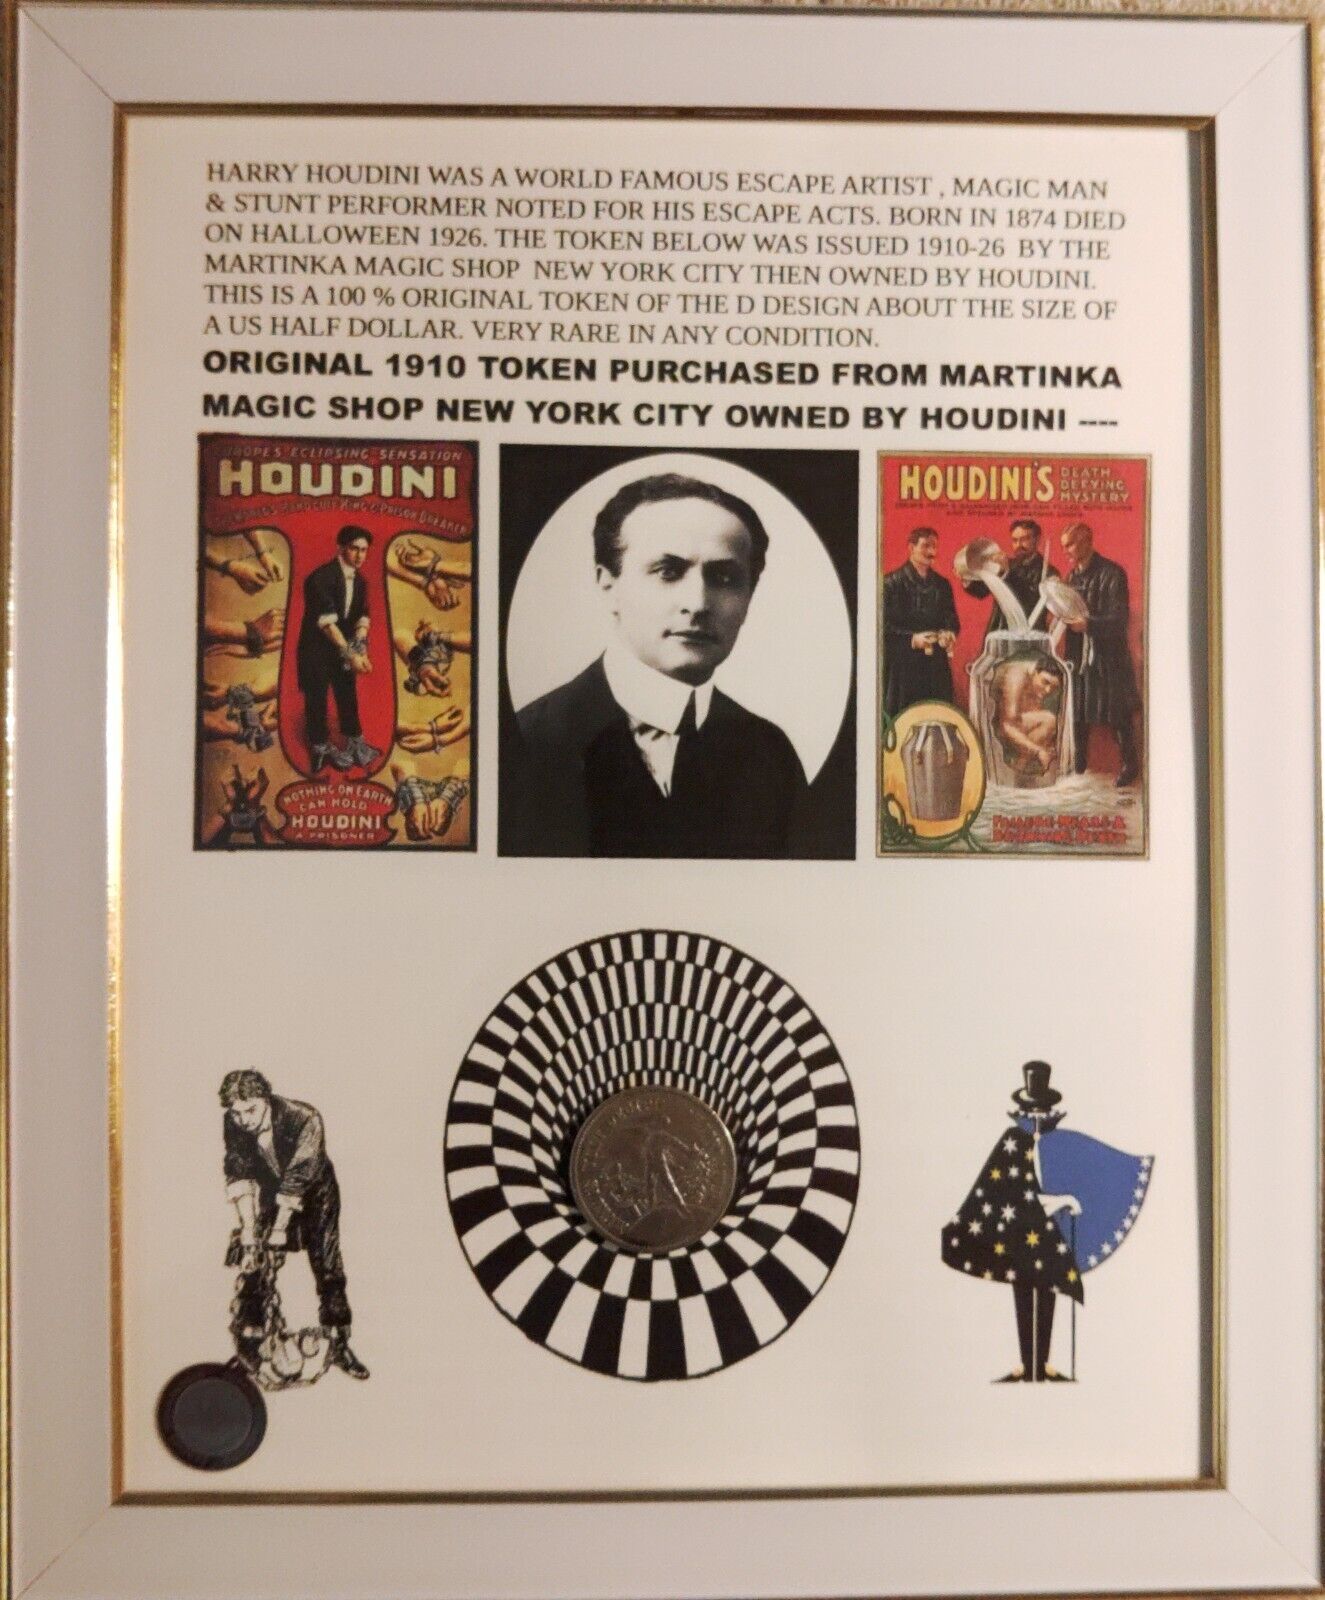 ORIGINAL MARTINKA MAGIC SHOP TOKEN FROM STORE OWNED BY HOUDINI FRAMED  VERY NICE